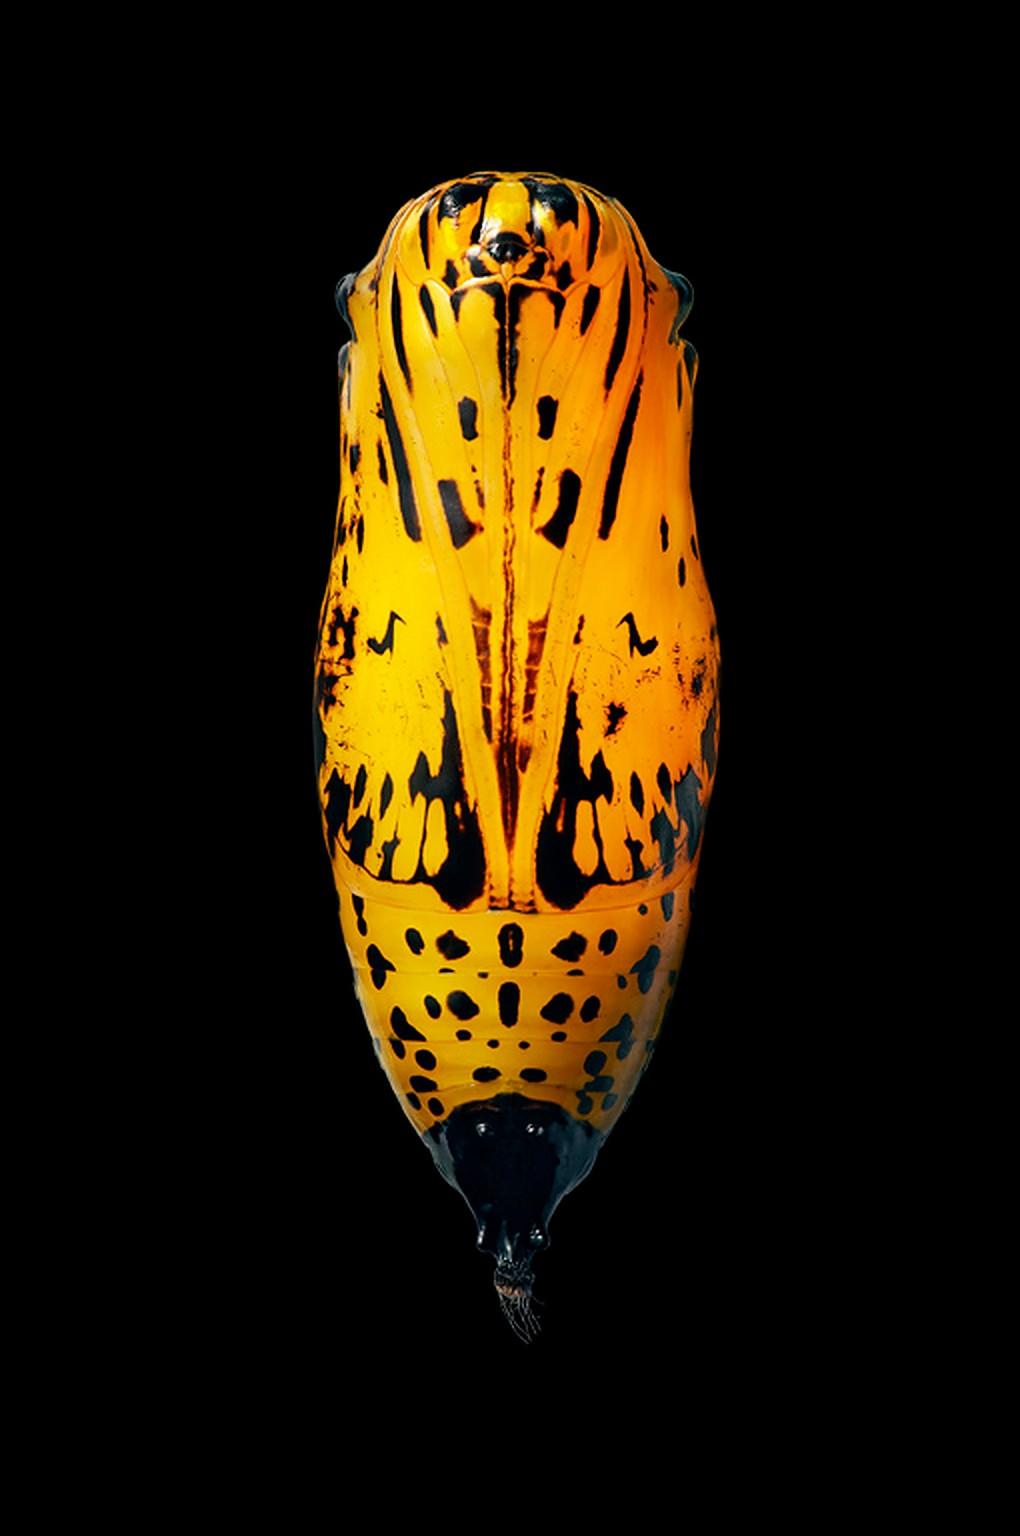 Tim Flach Color Photograph - Rice Paper - Contemporary British Art, Animal Photography, Butterfly, TIm Flach